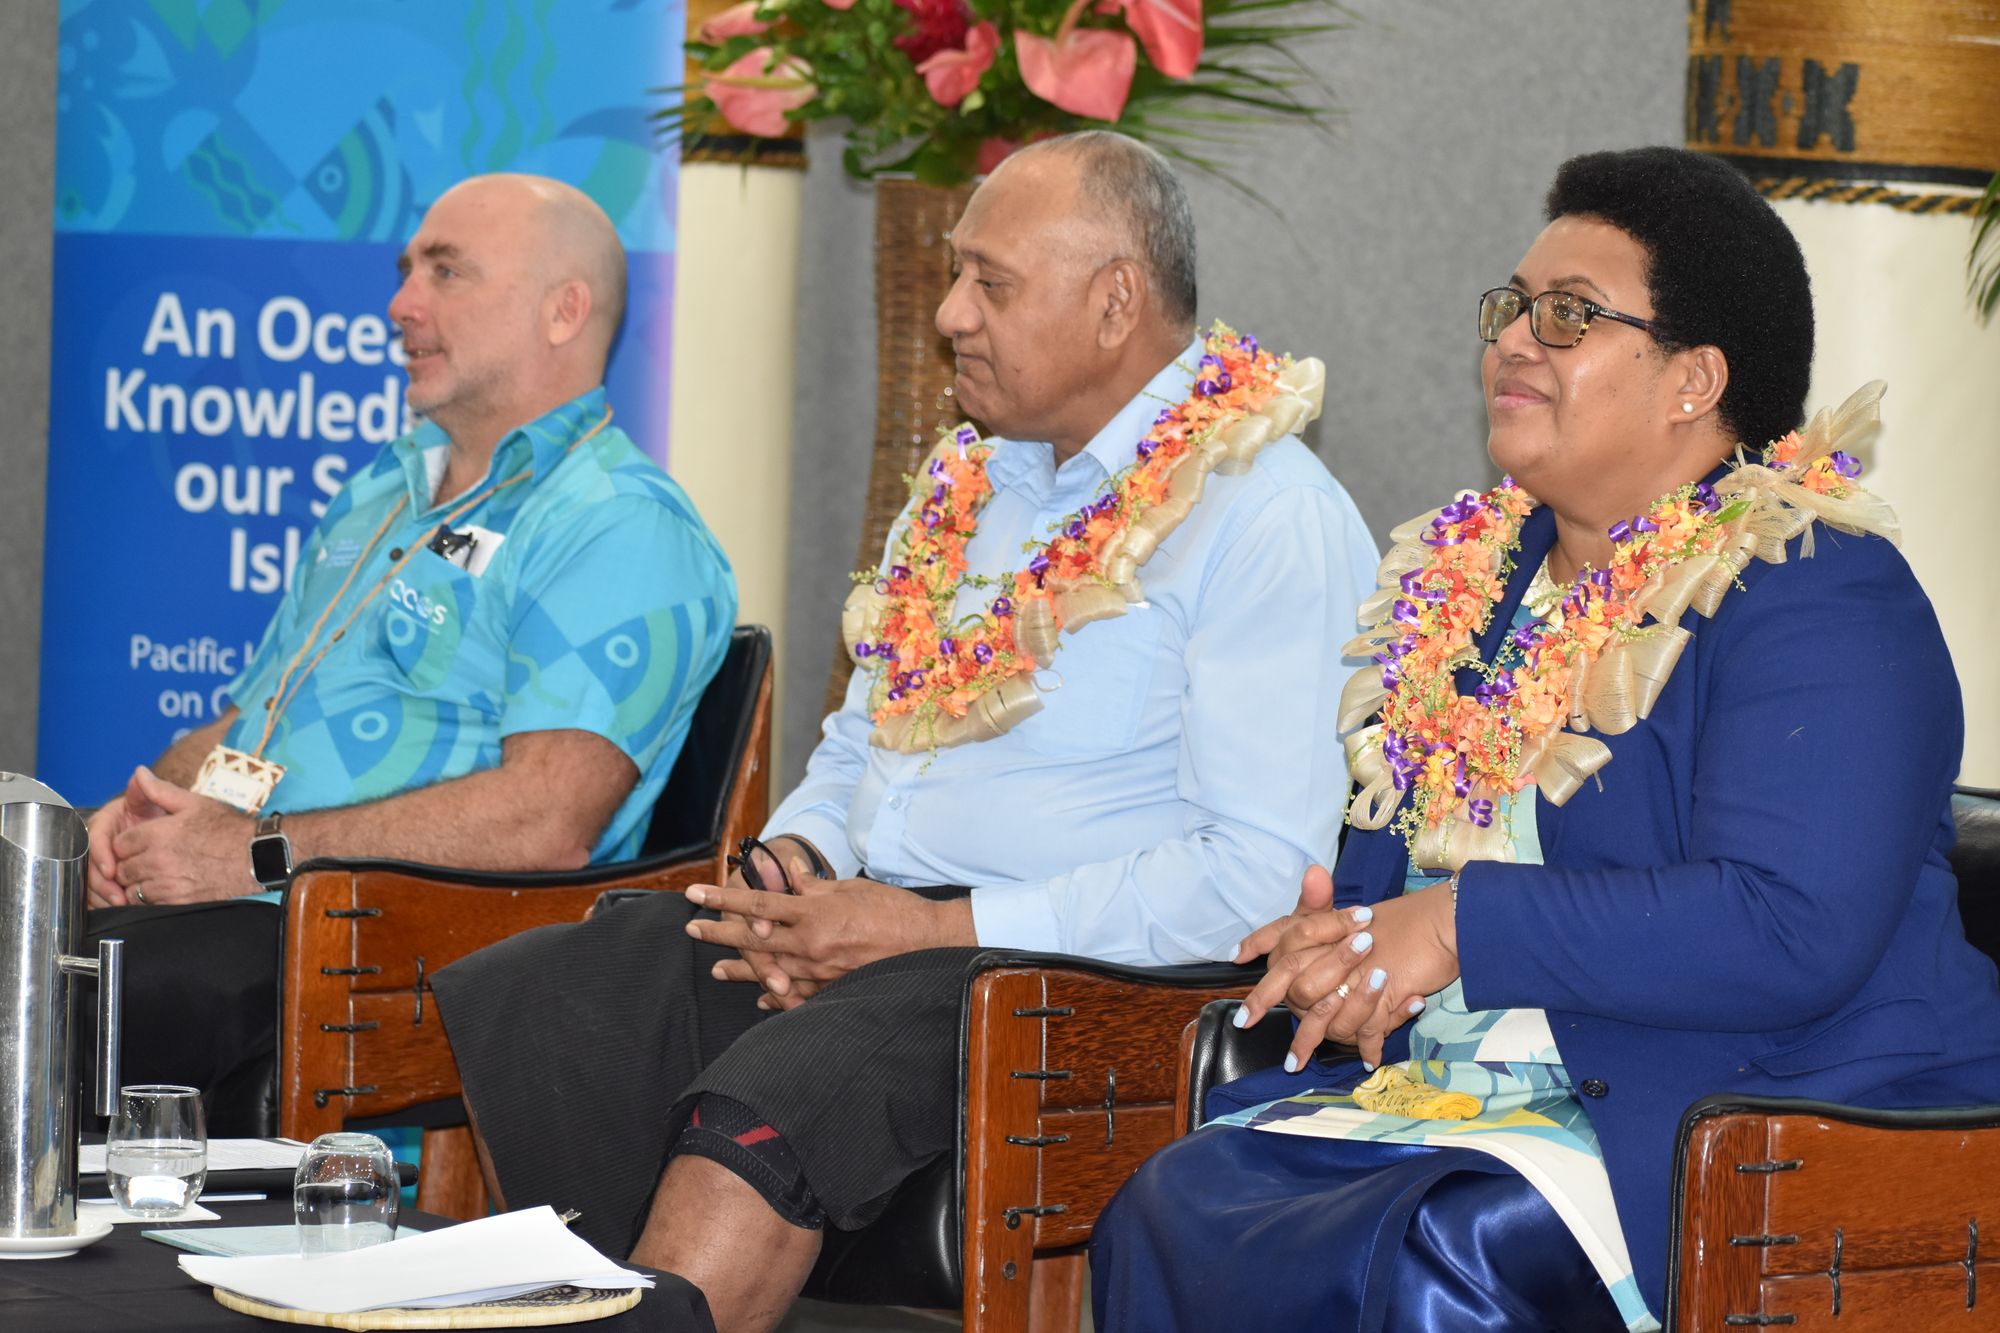 1st Pacific Islands Conference on Ocean Science and Ocean Management